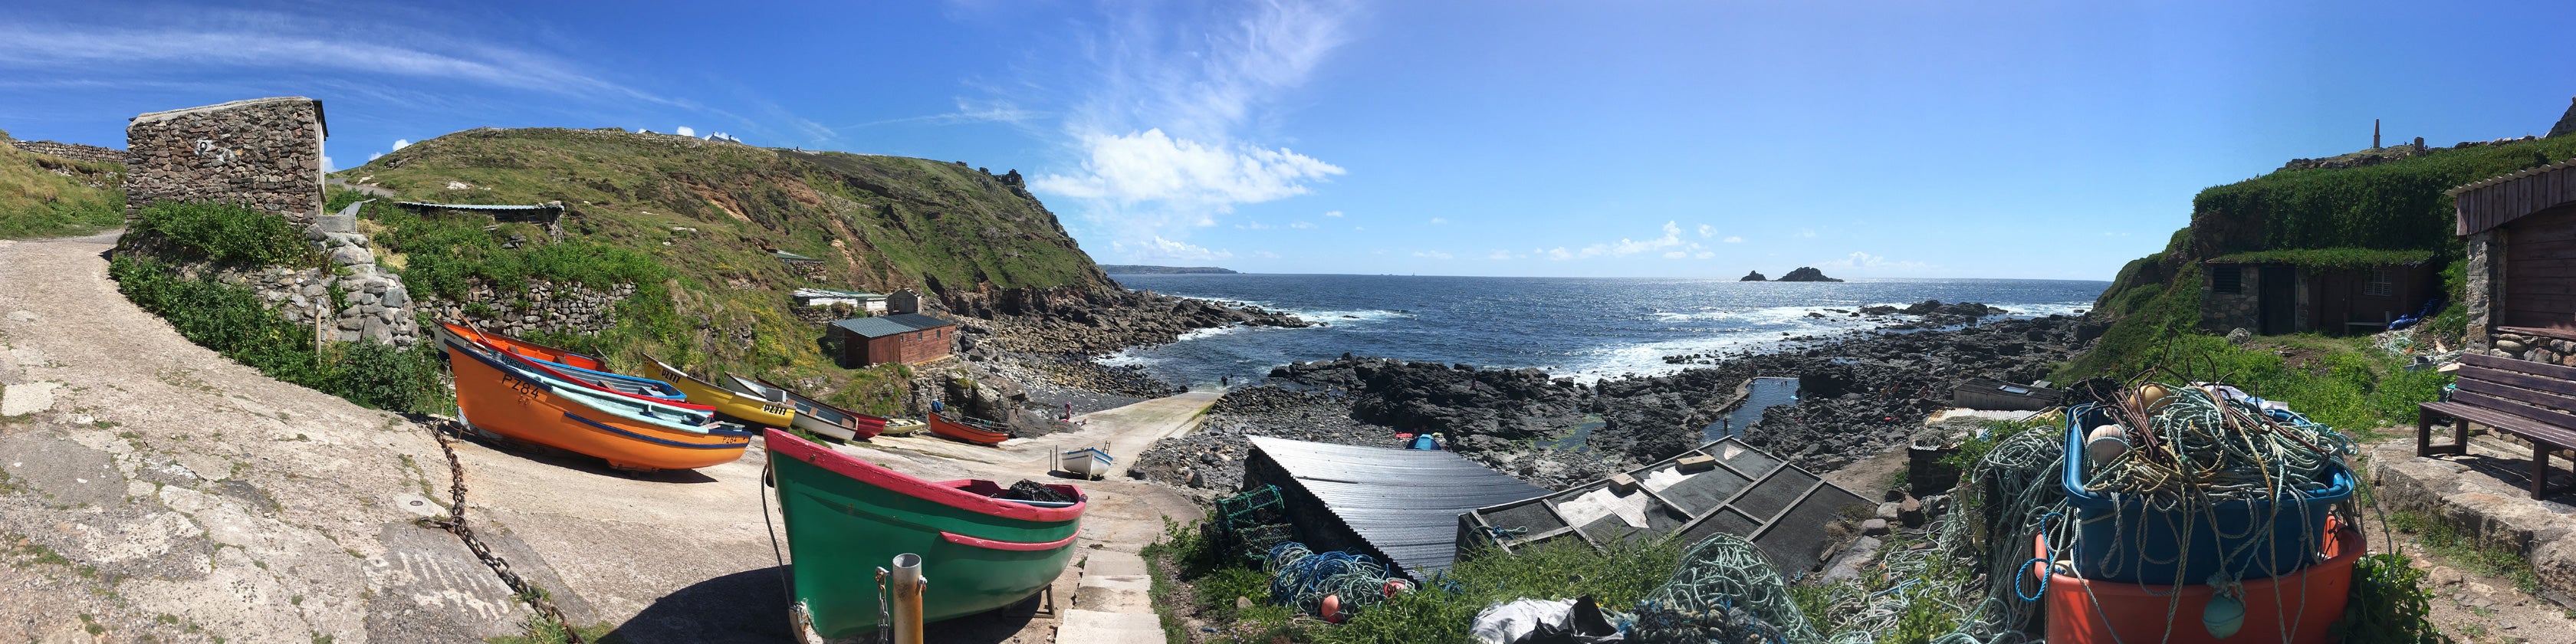 Panoramic photograph of a Cornish fishing cove, with fishing boats and nets in the foreground. A slipway leads down the the sea, the sky is blue with the odd cloud.